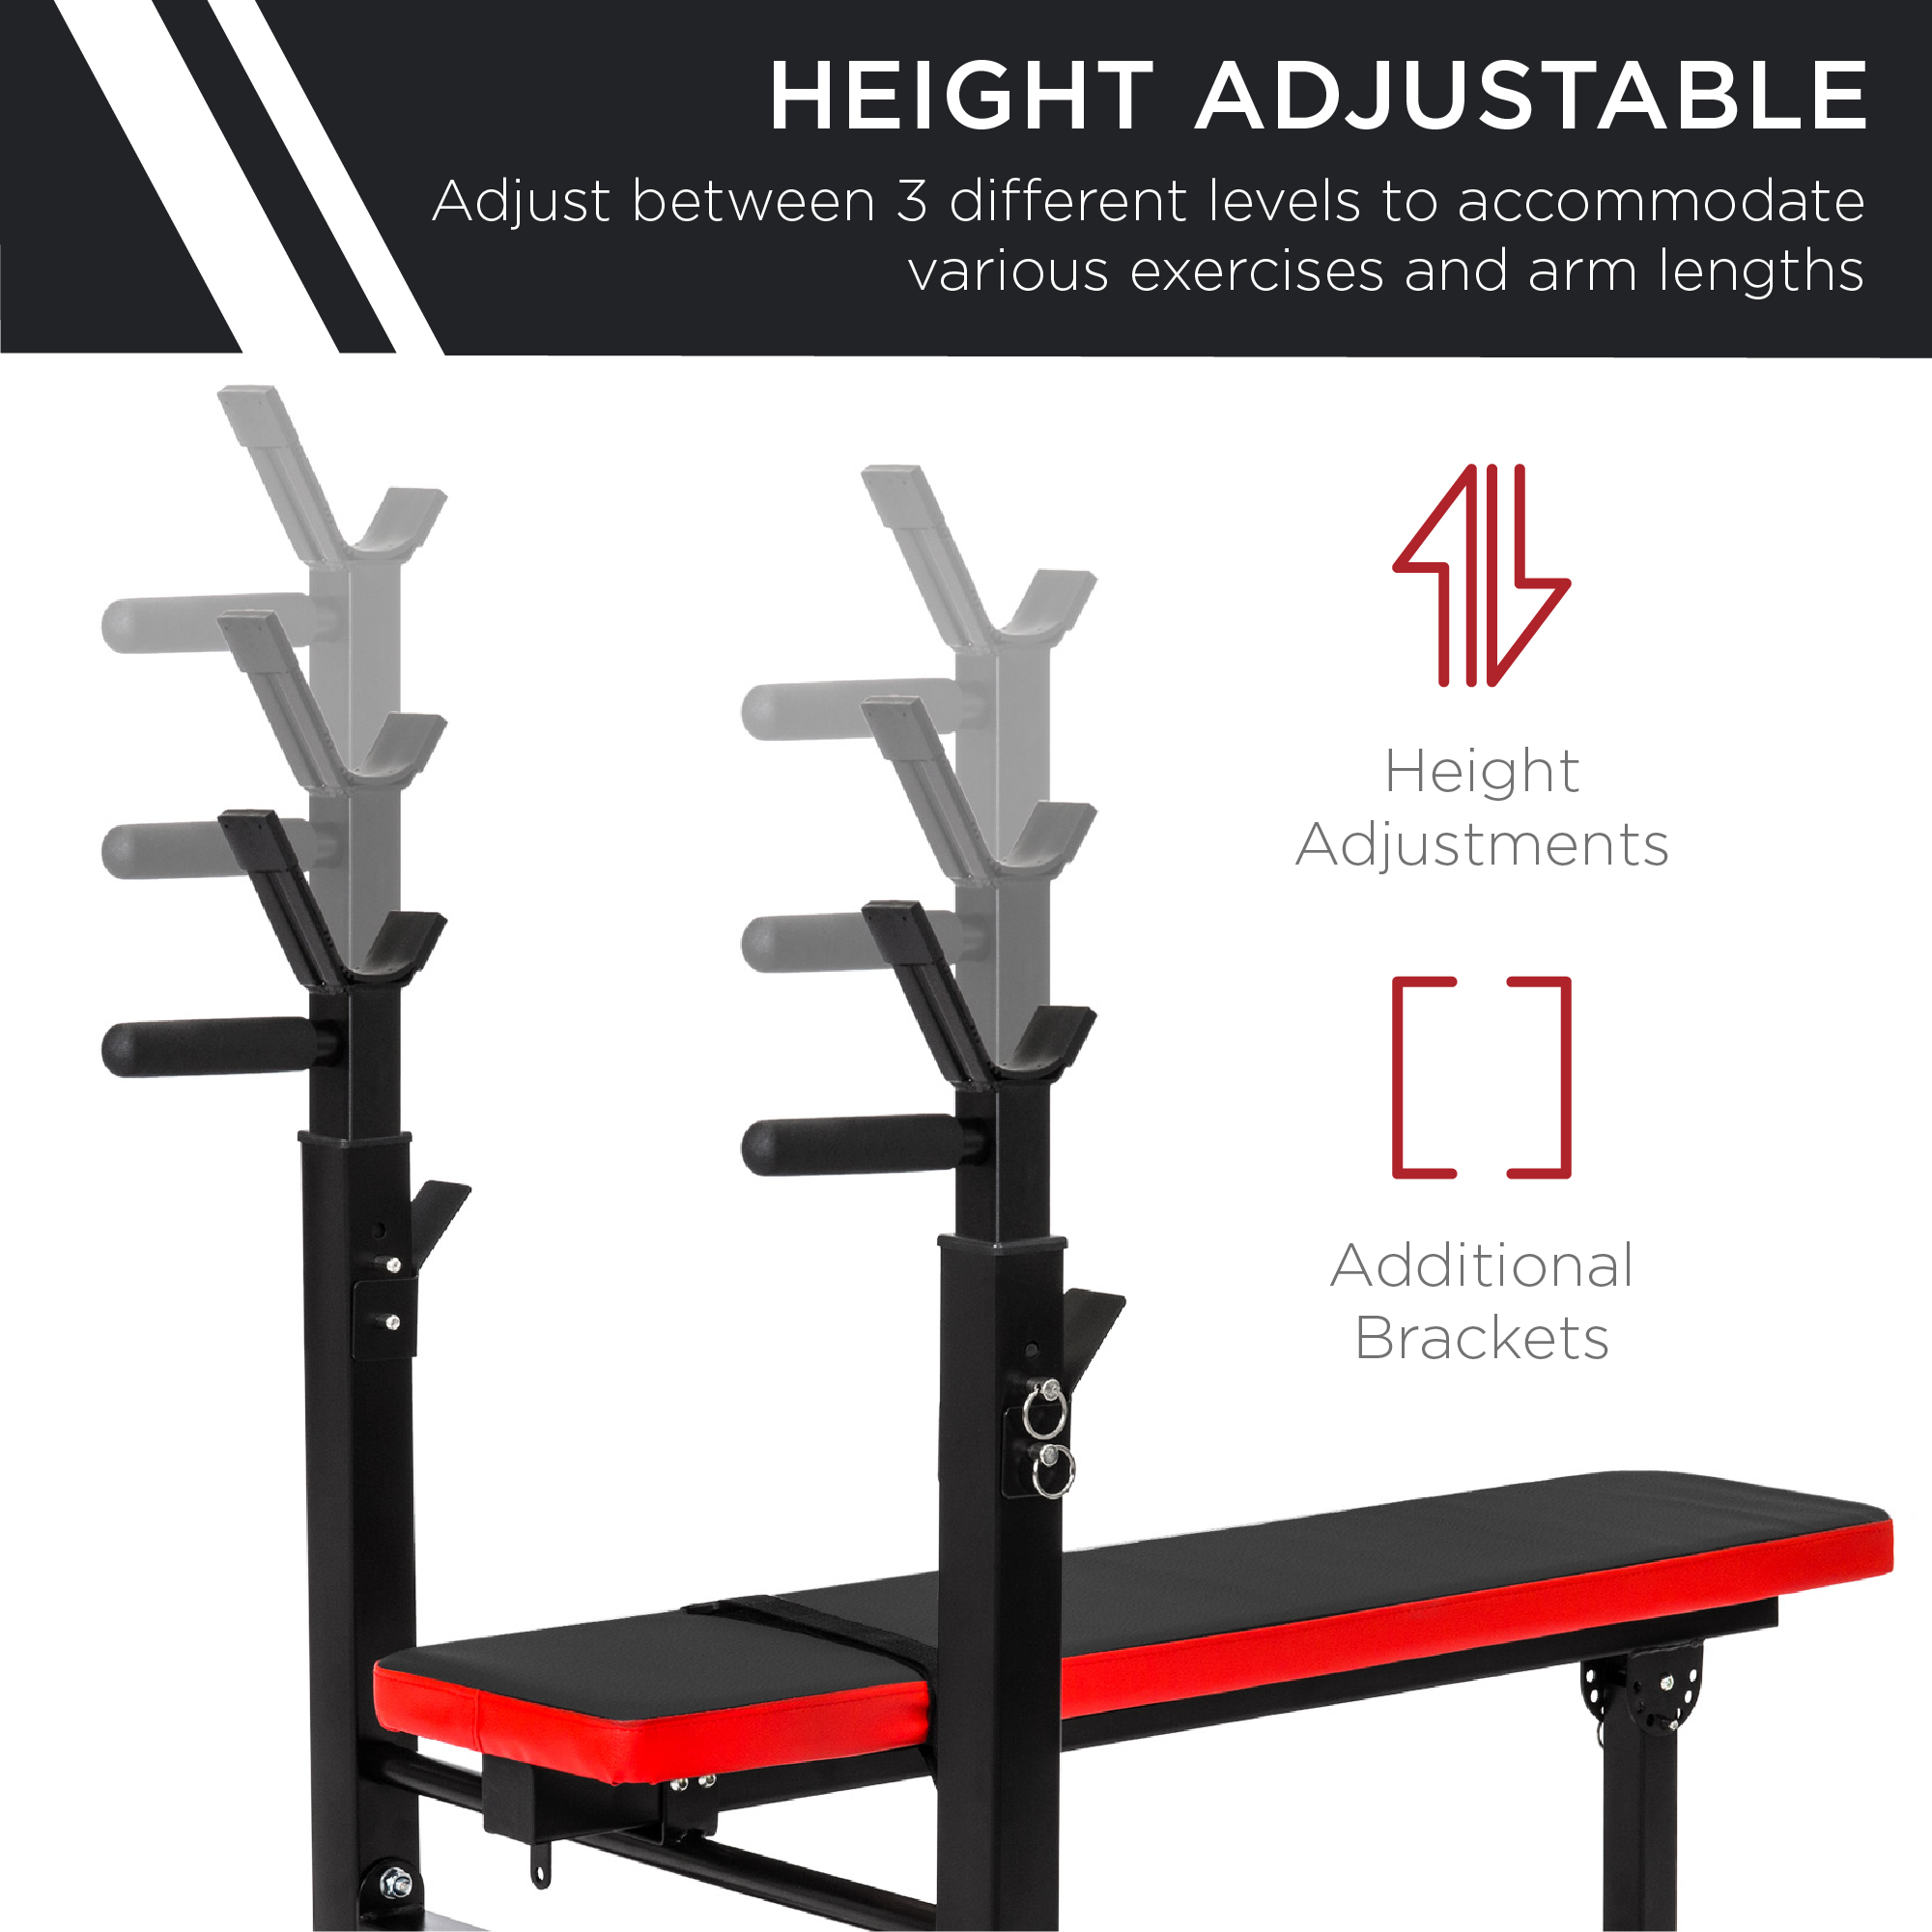 Best Choice Products Adjustable Folding Fitness Barbell Rack & Weight Bench for Home Gym, Strength Training - Black/Red - image 3 of 6